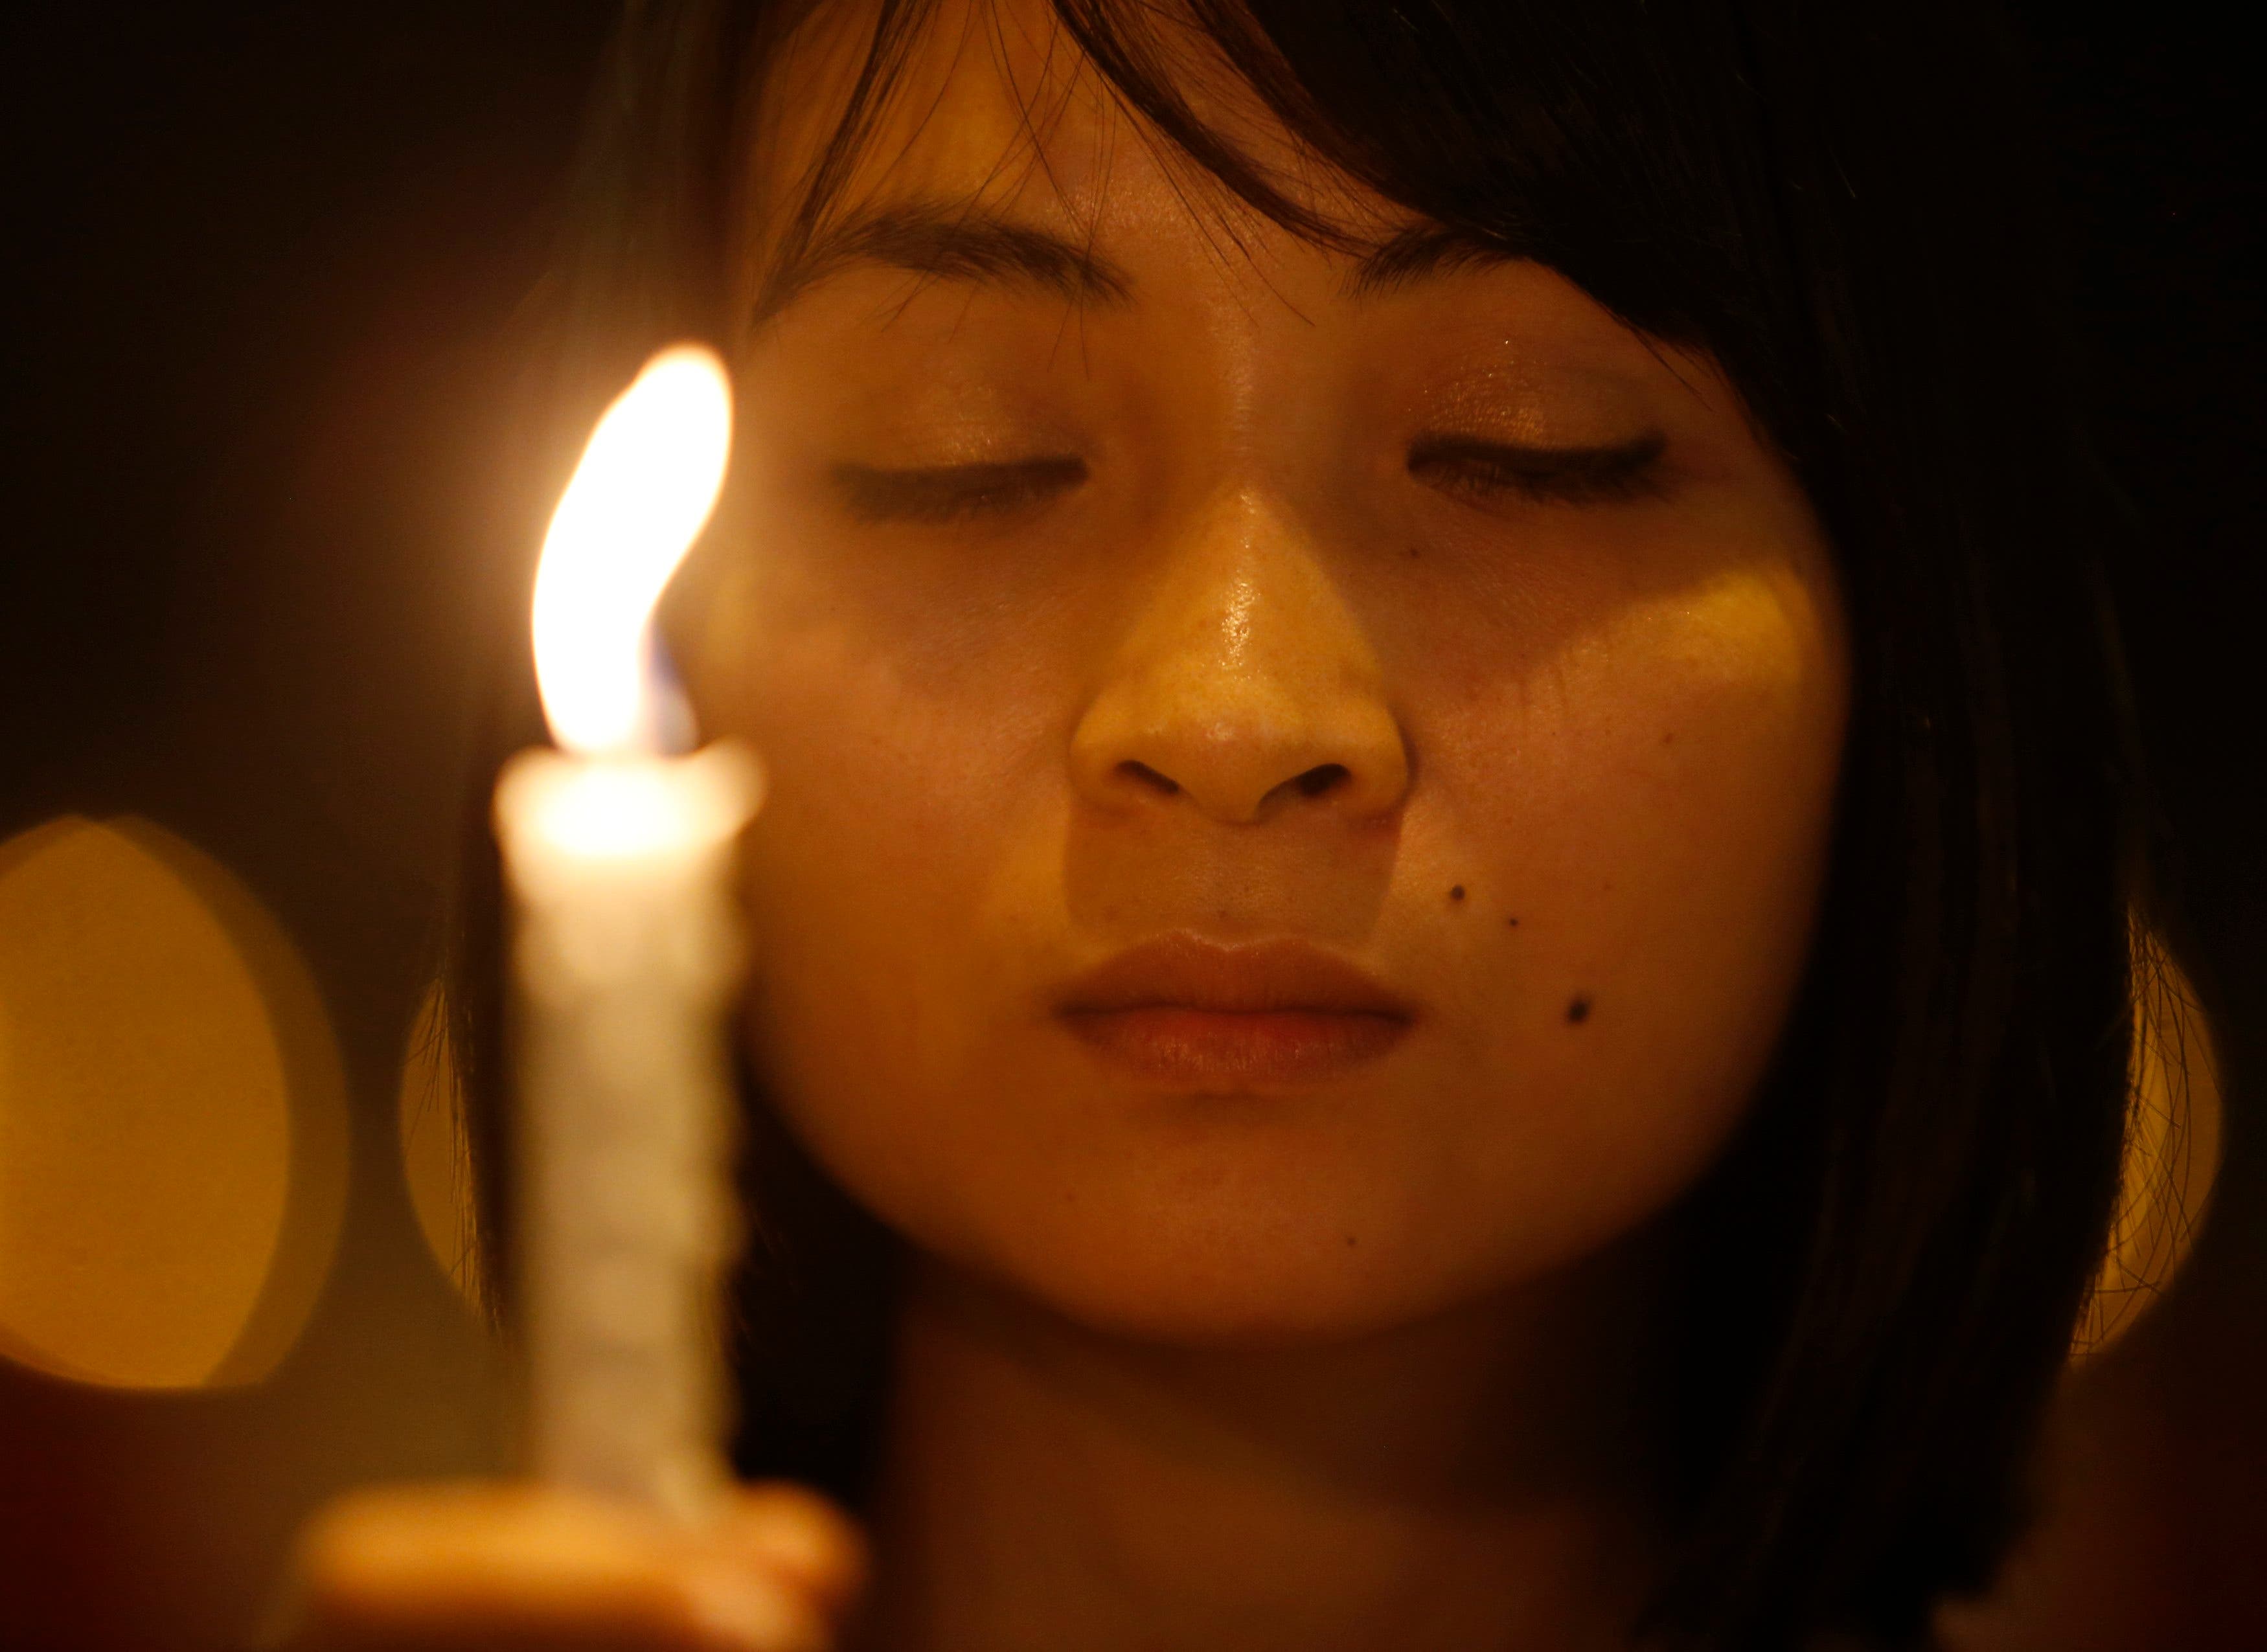 Family of Malaysian Airline passengers unite in hope